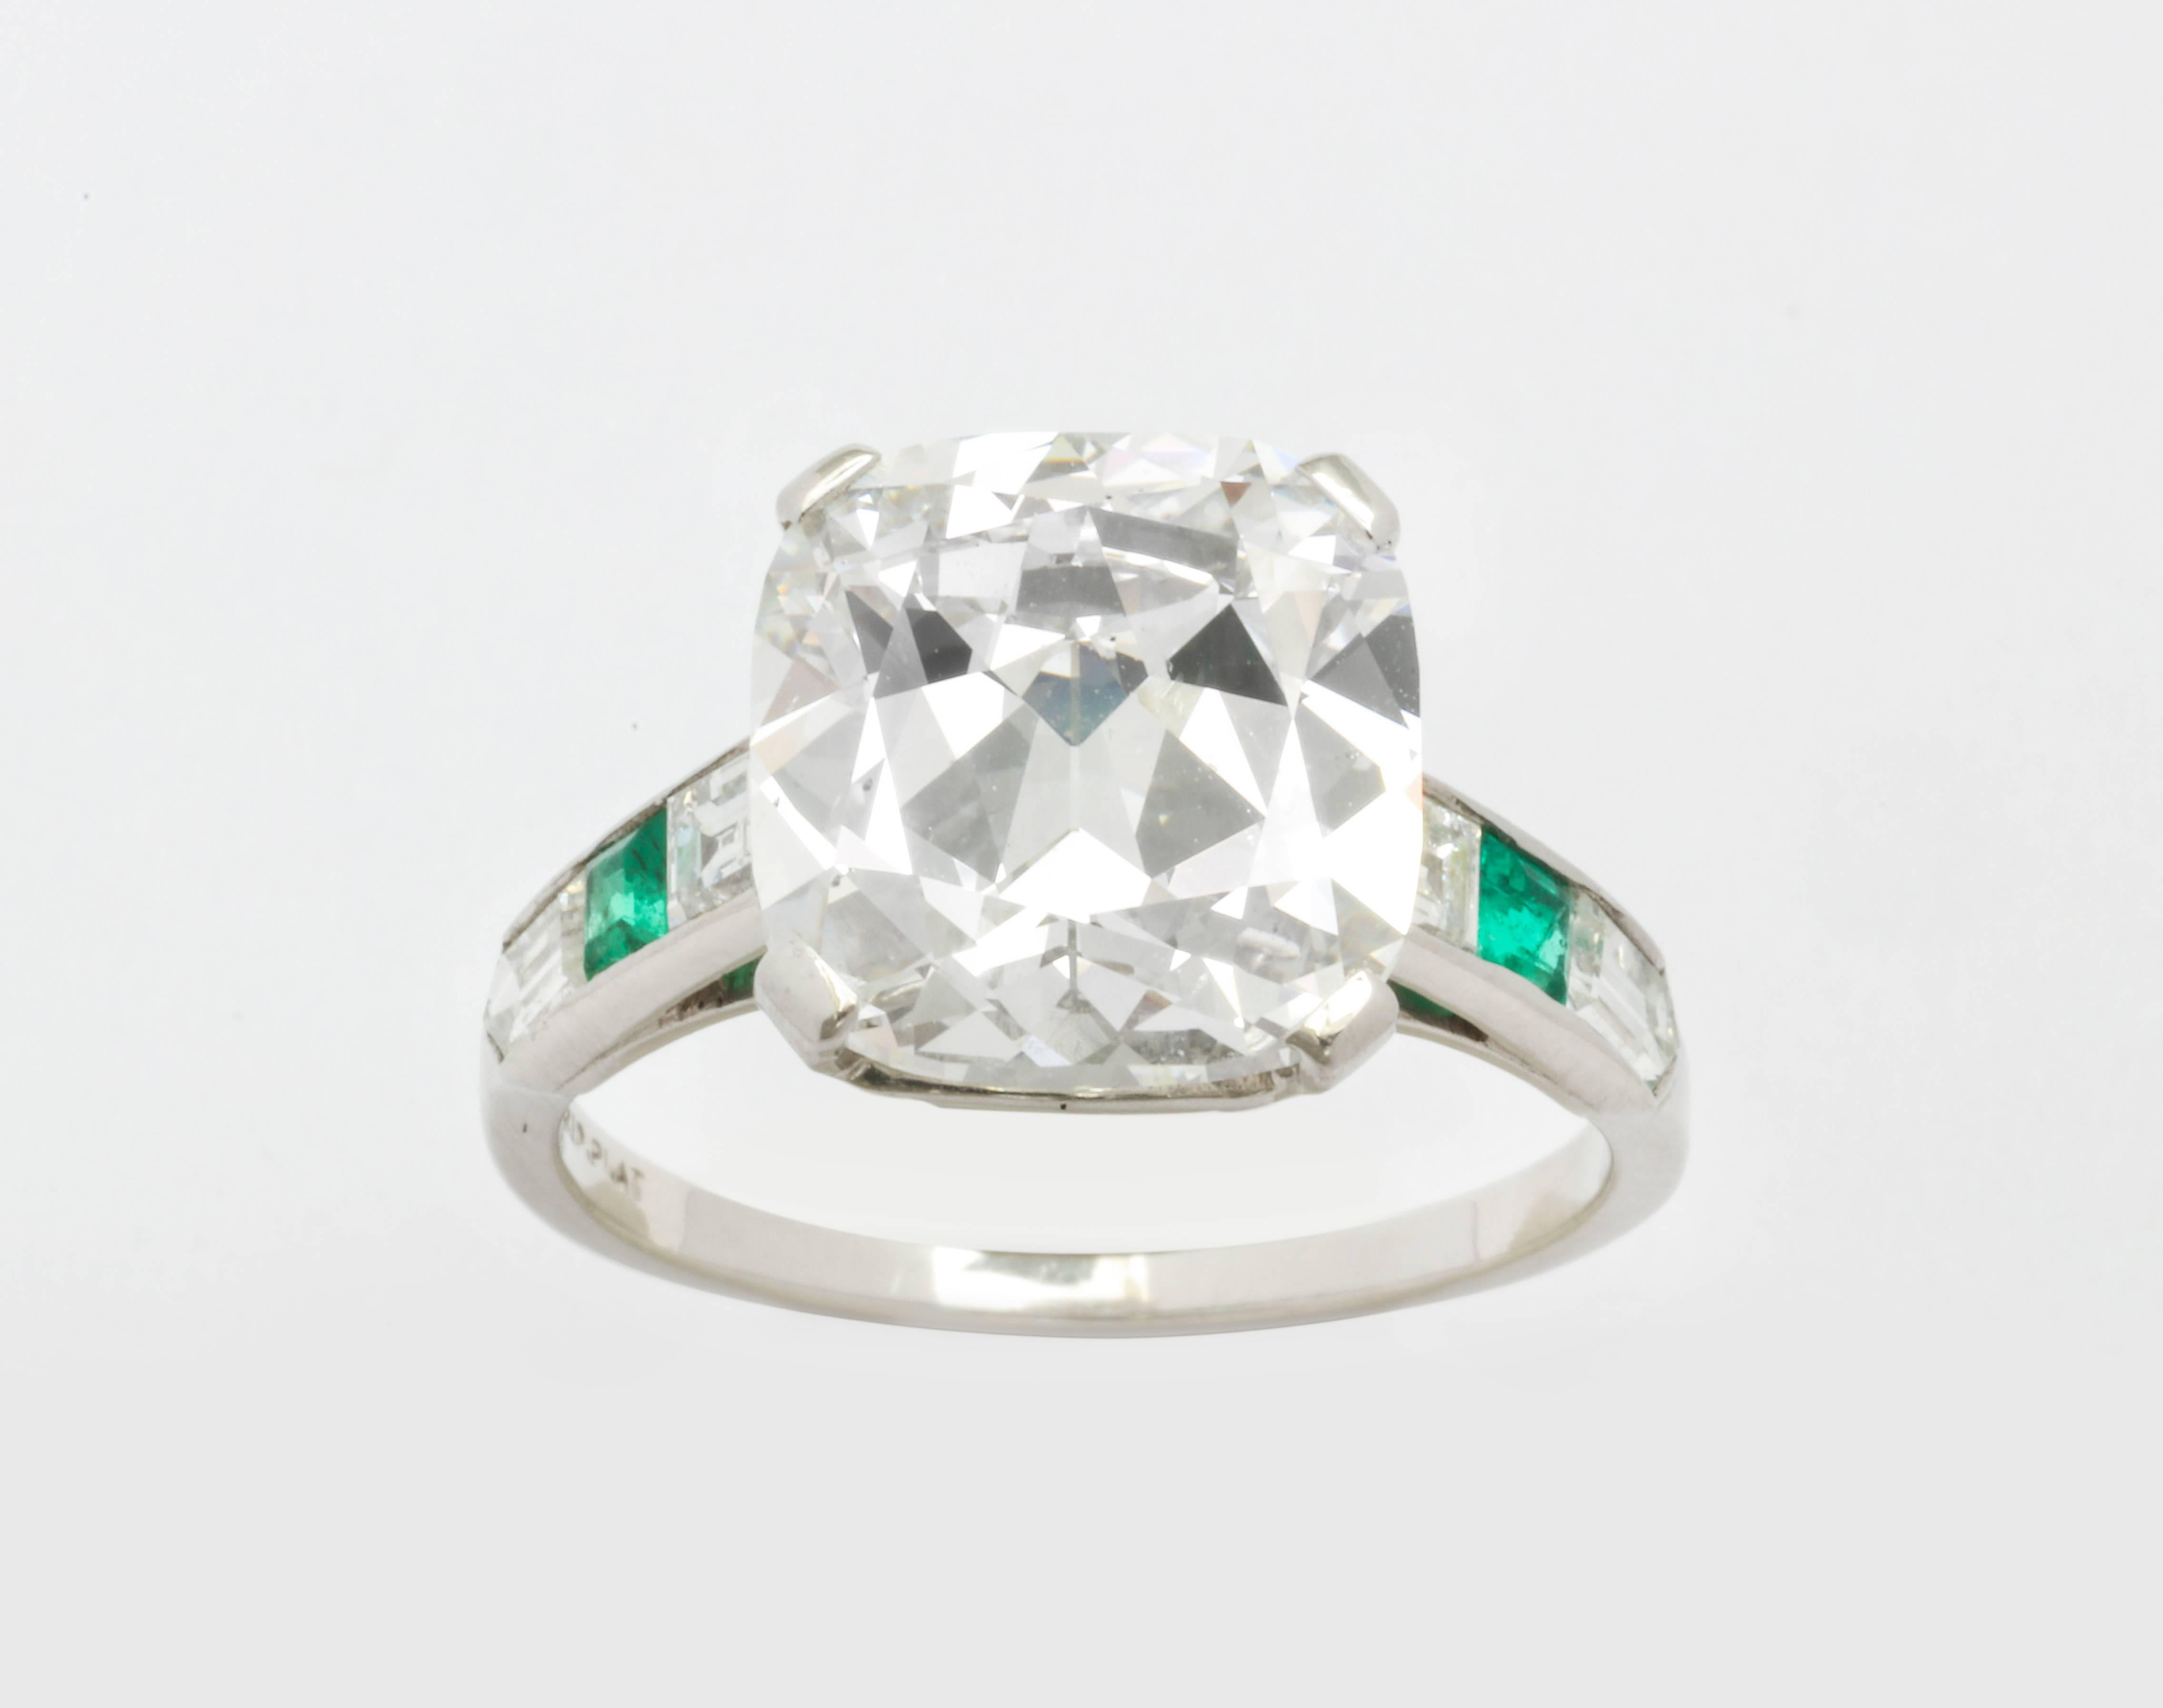 A diamond ring from the Art Deco Era featuring a 5.27 carat cushion cut diamond. Accompanied by a GIA certificate 2155593534 stating the diamond is an H color and SI1 clarity. The shank of the ring features two square emerald cut emeralds, two